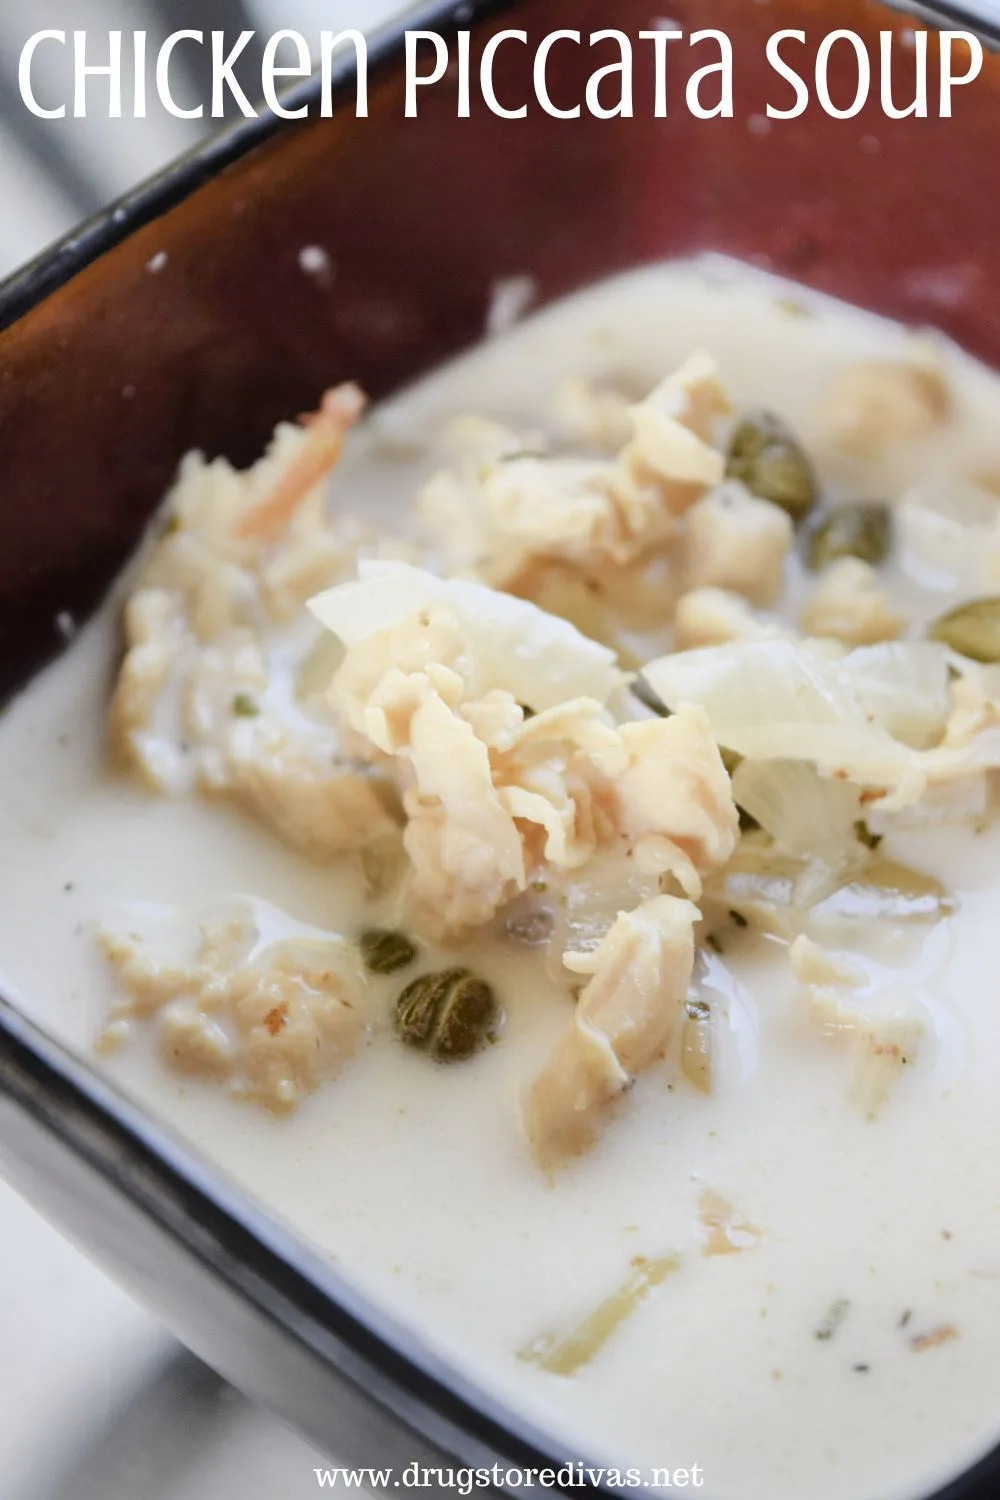 A white soup with chicken and capers showing in a red bowl with the words 